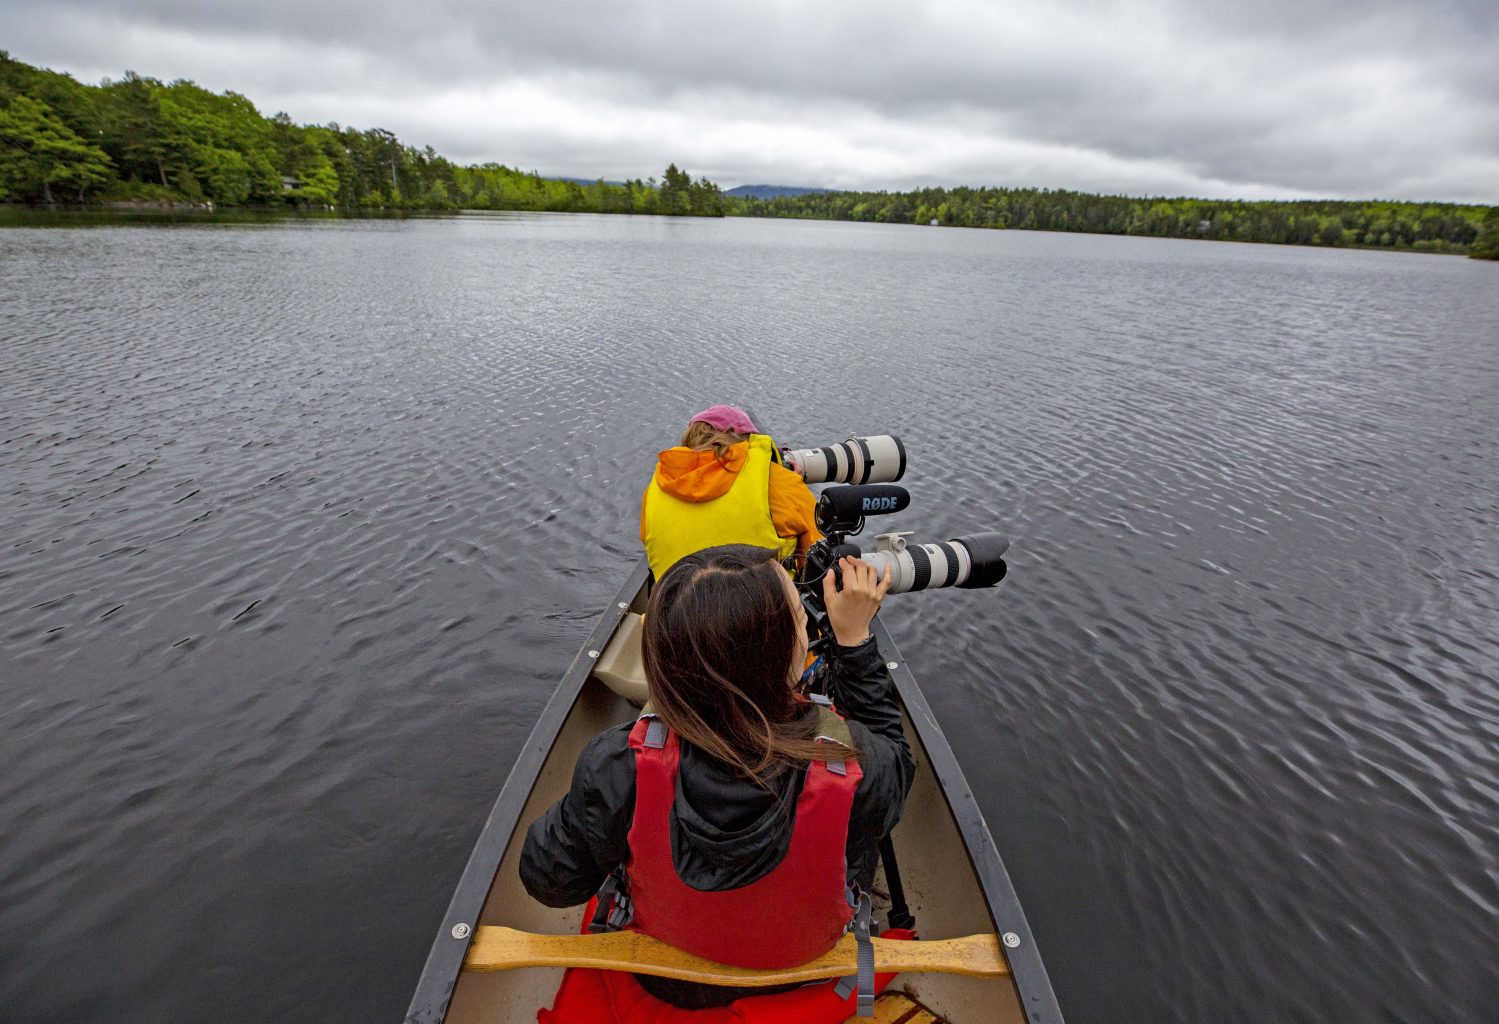 Canon U.S.A. helps protect Acadia’s resources